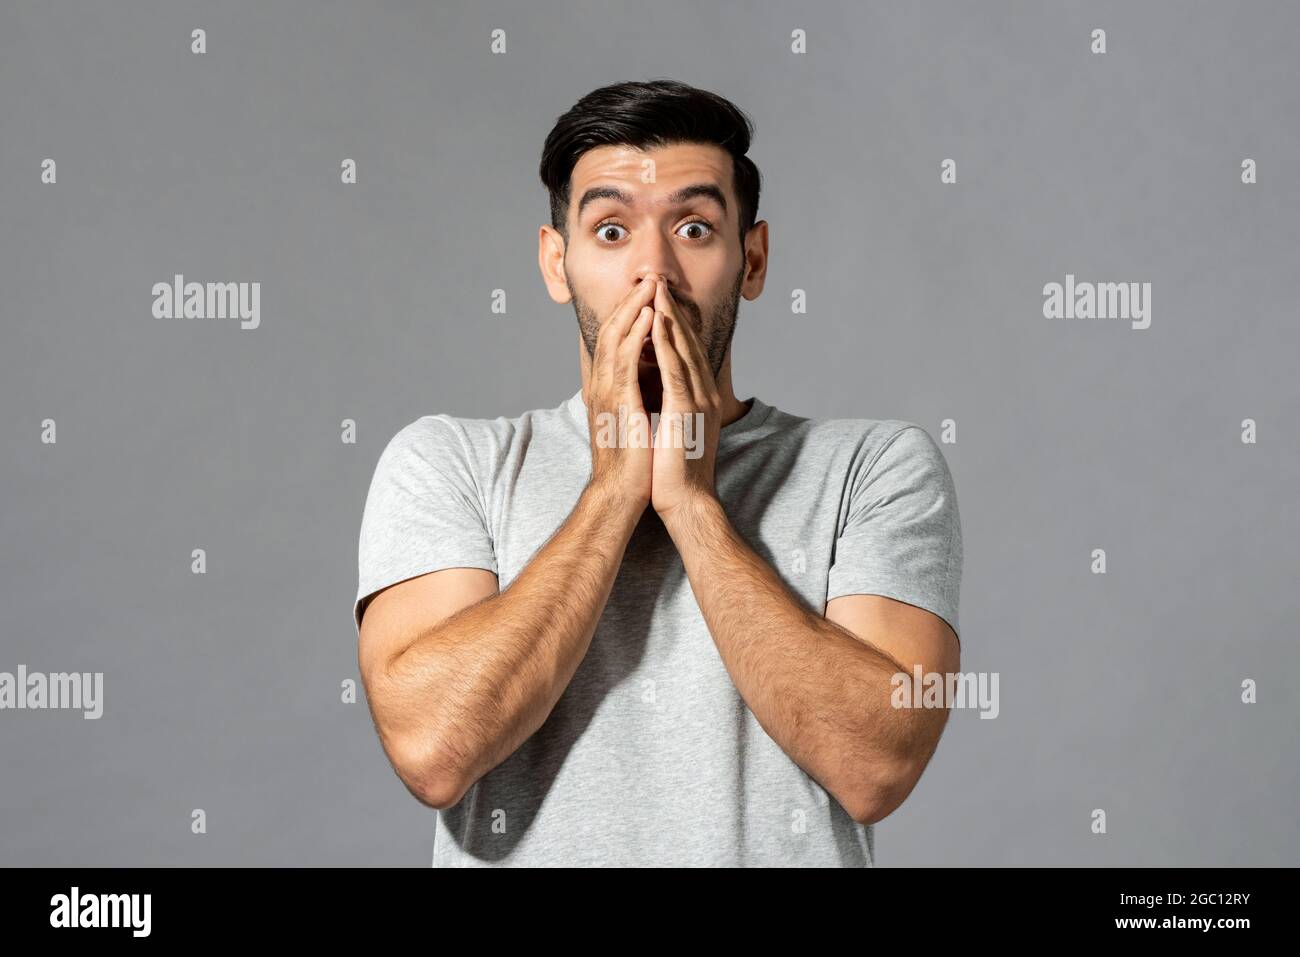 hk``````````````````````````````````````````````````````Shocked young Caucasian man with hands covering mouth in isolated light gray studio background Stock Photo